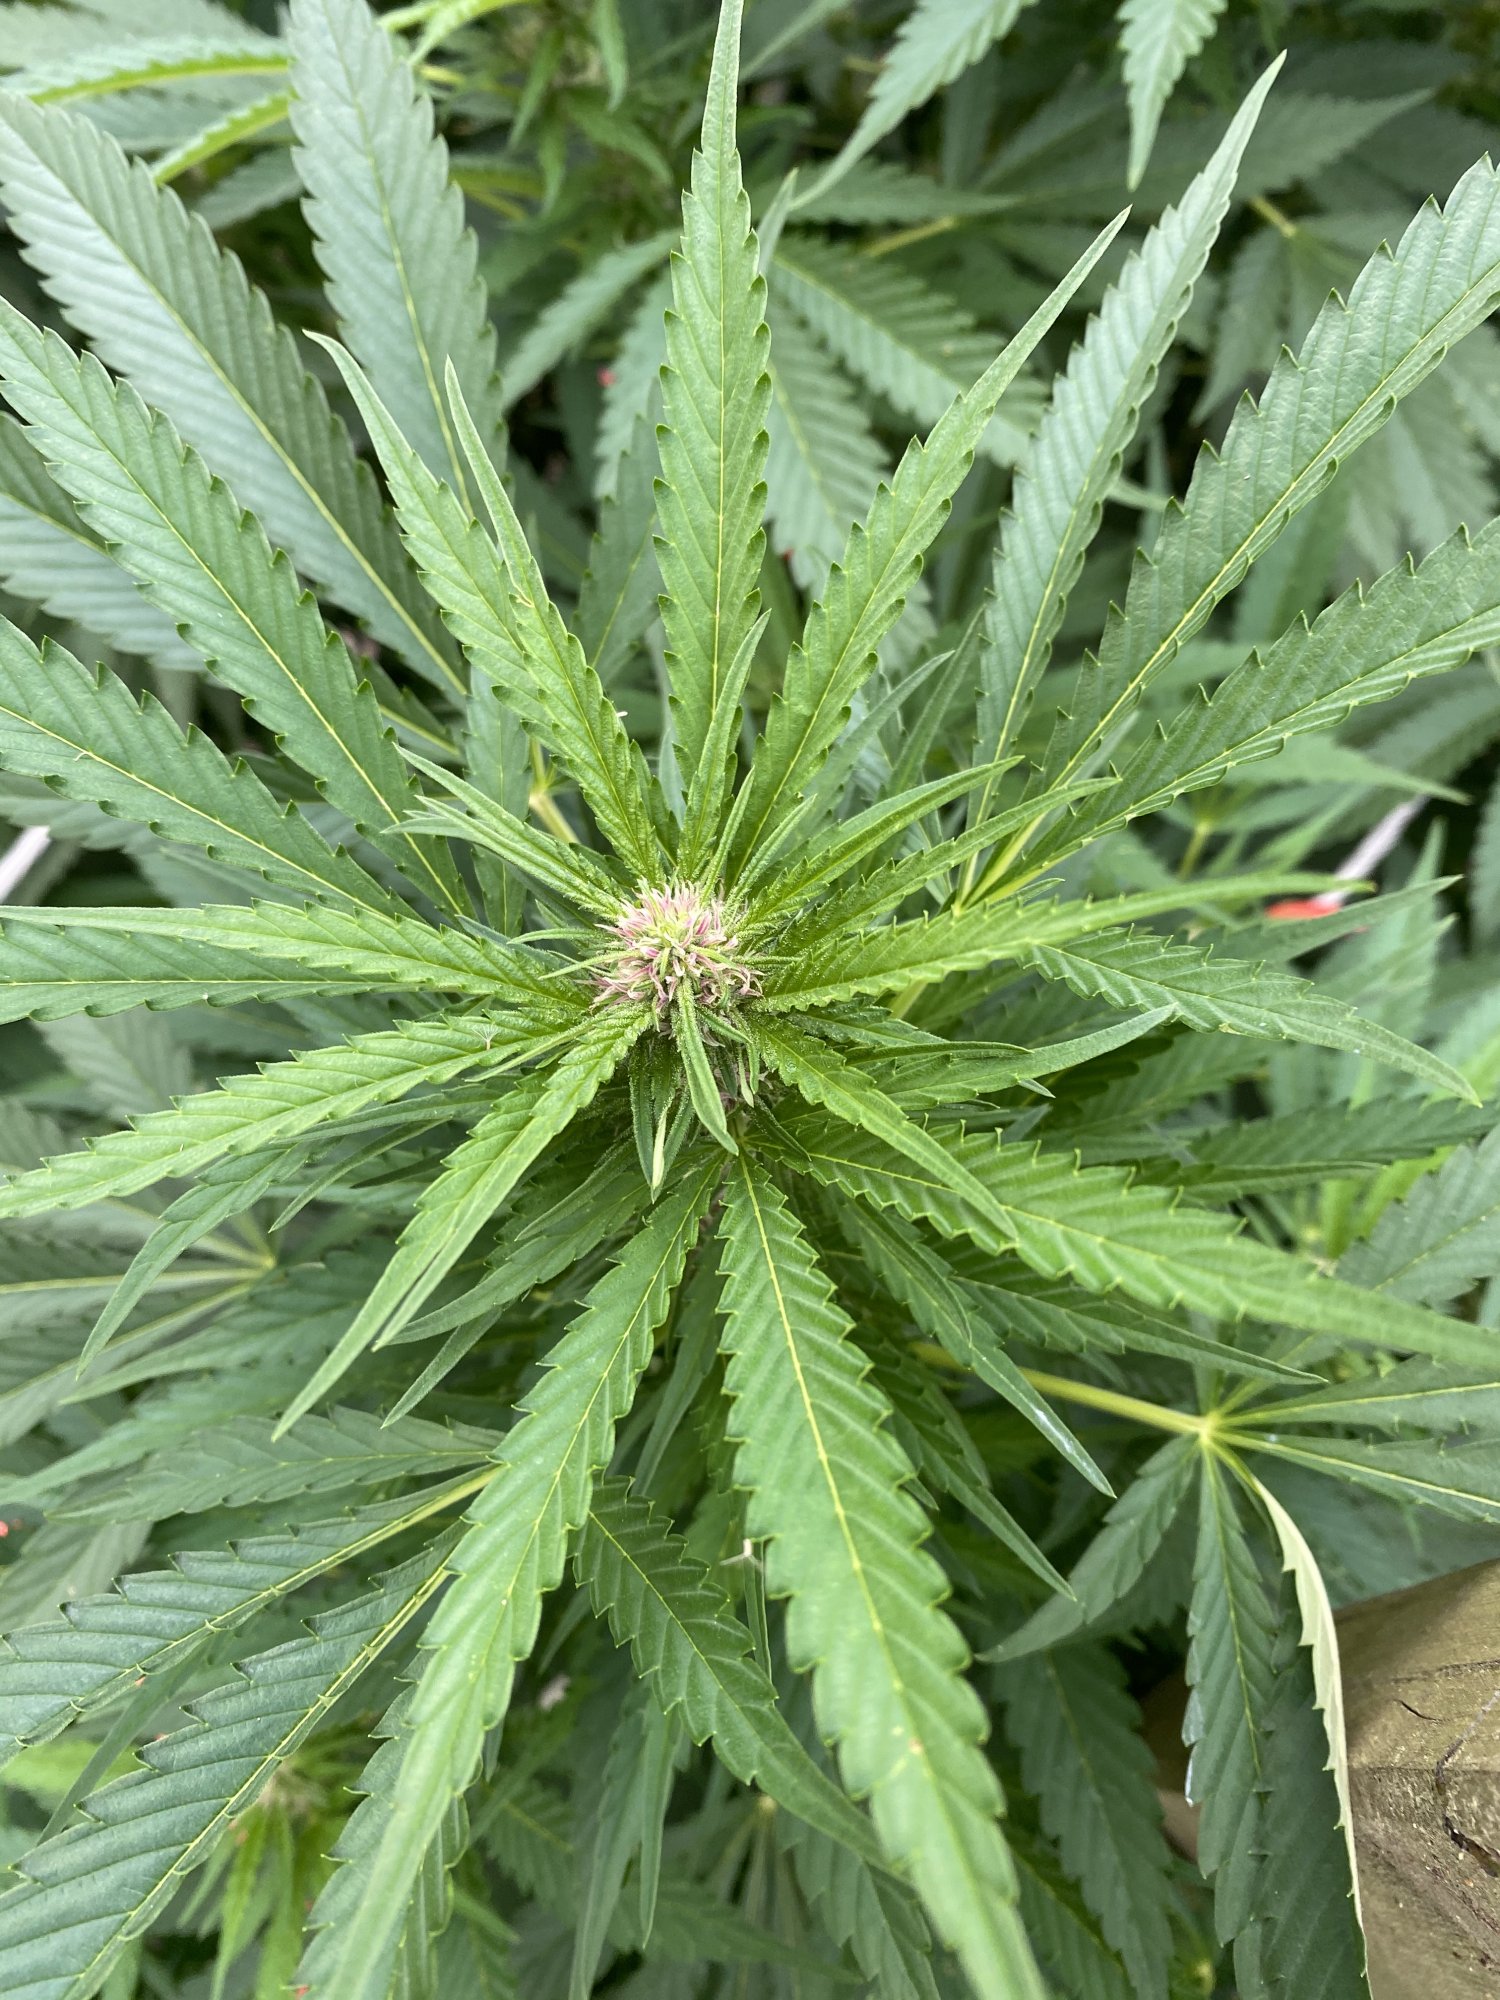 Just sharing some pics of my outdoor grow 9